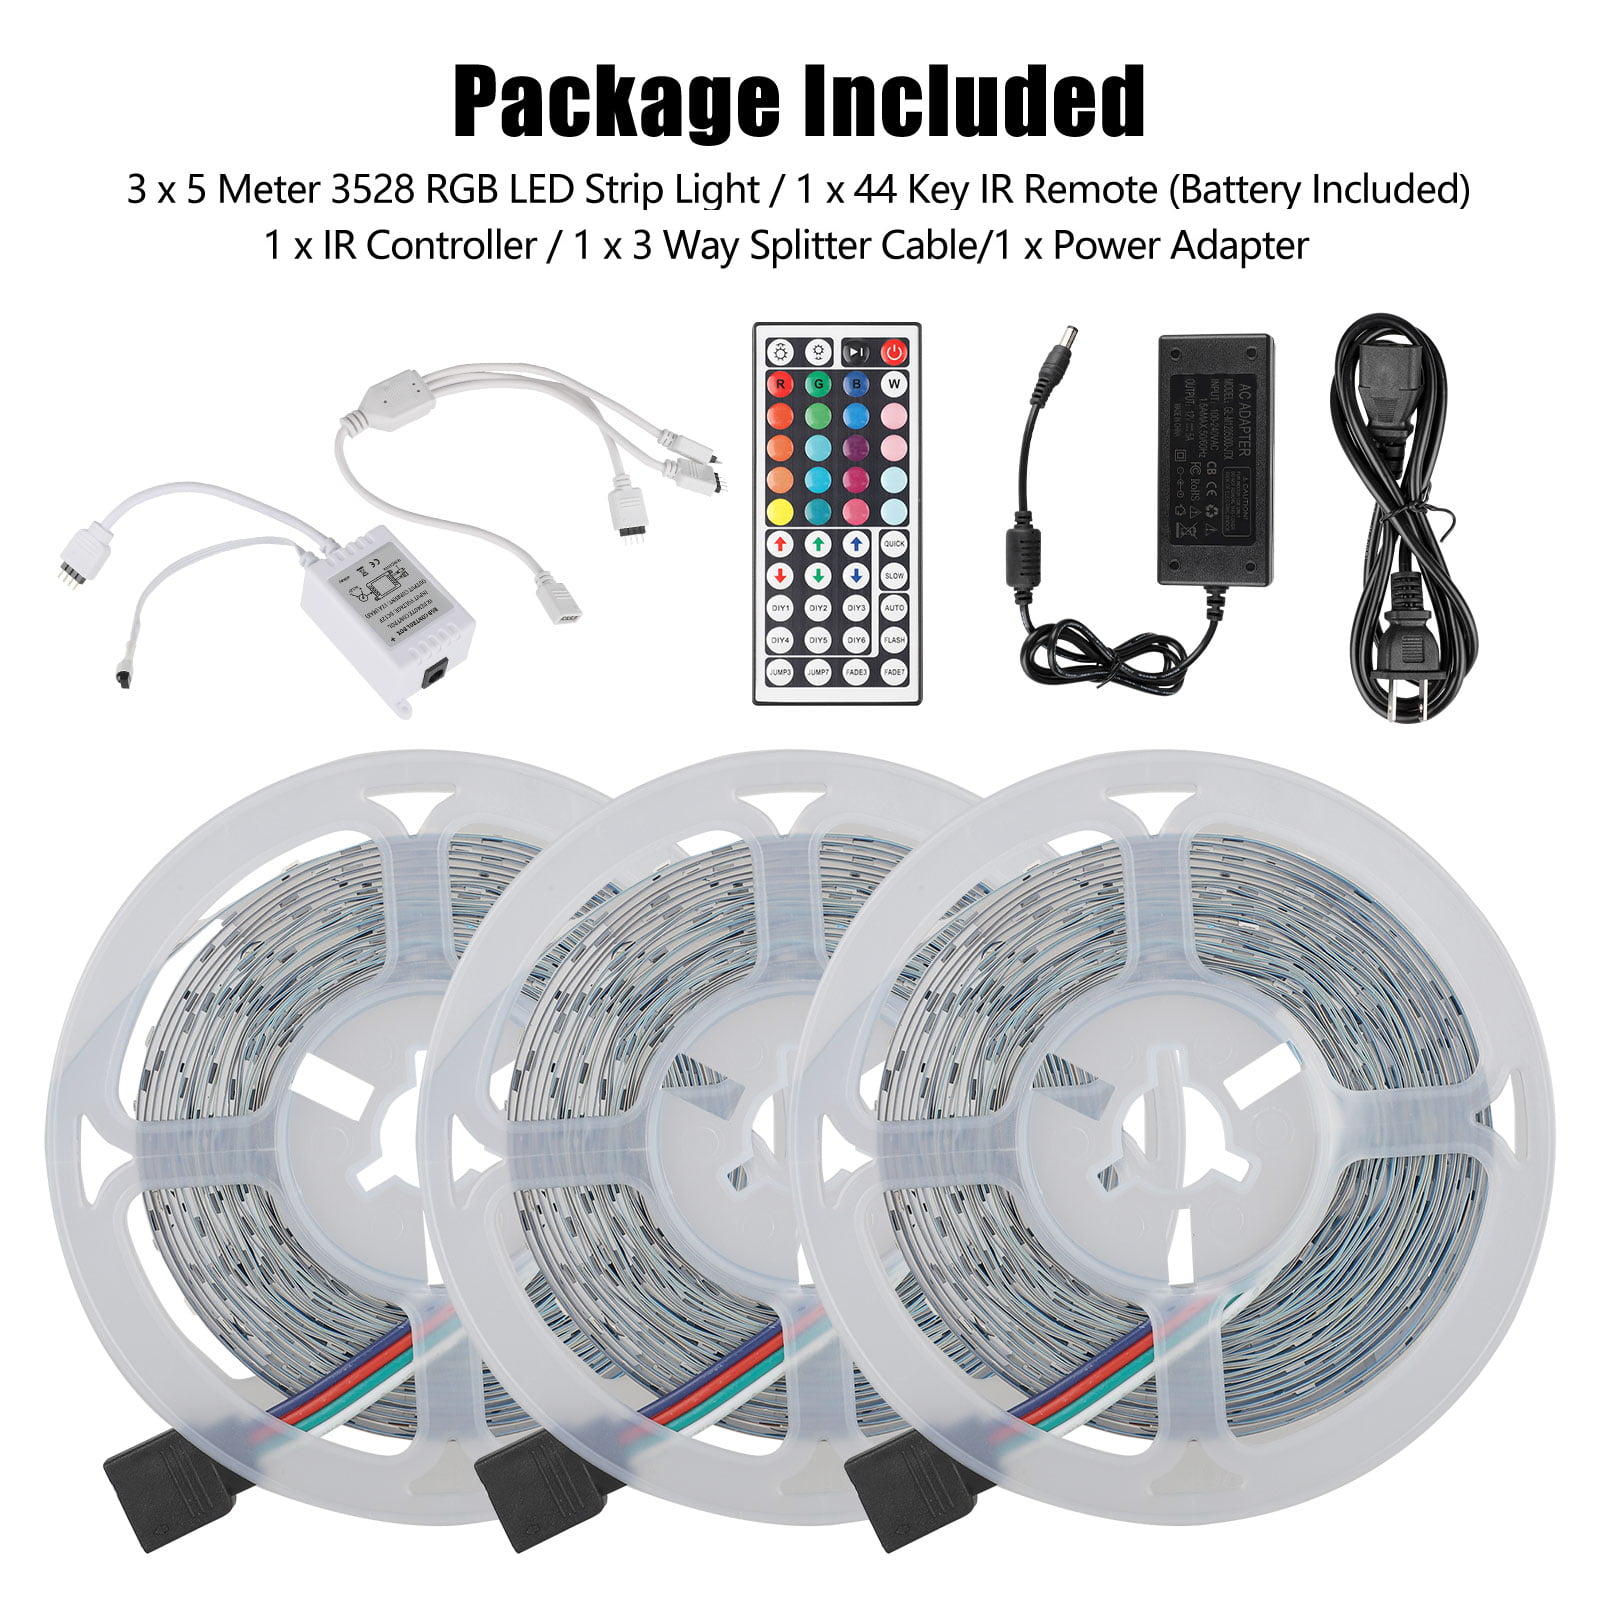 50ft LED RGB with Remote, Waterproof for Home Bedroom Indoor Outdoor Decor - Walmart.com